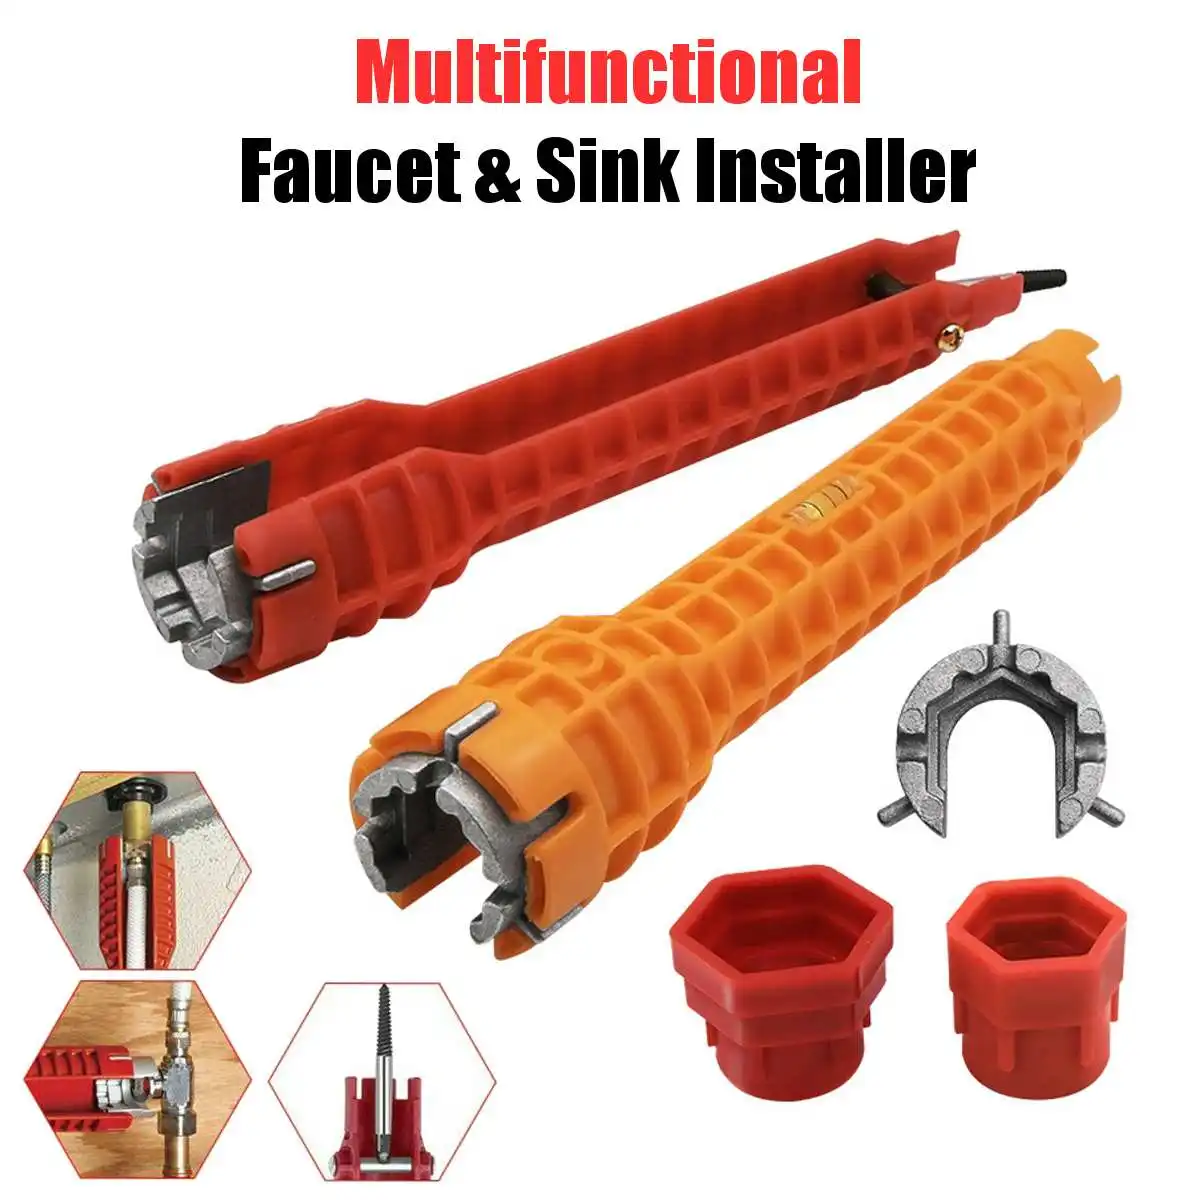 Multi Pipe Wrench Faucet Sink Installer Tool Plumbers Fits 1” and 7/8“ Hex Nuts 